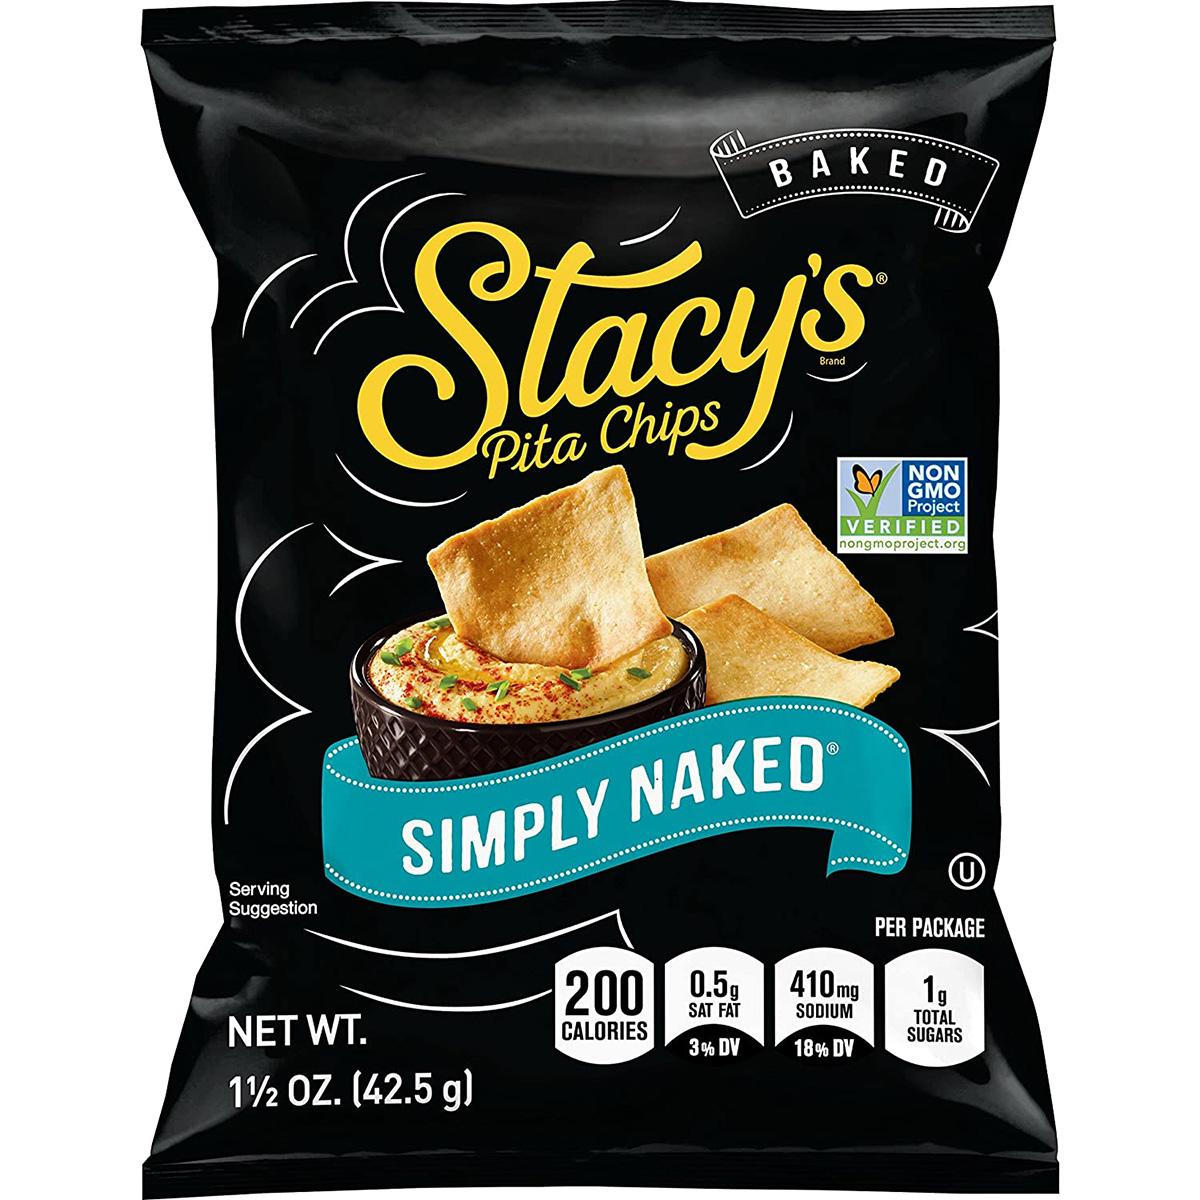 24 Stacys Simply Naked Pita Chips for $10.68 Shipped